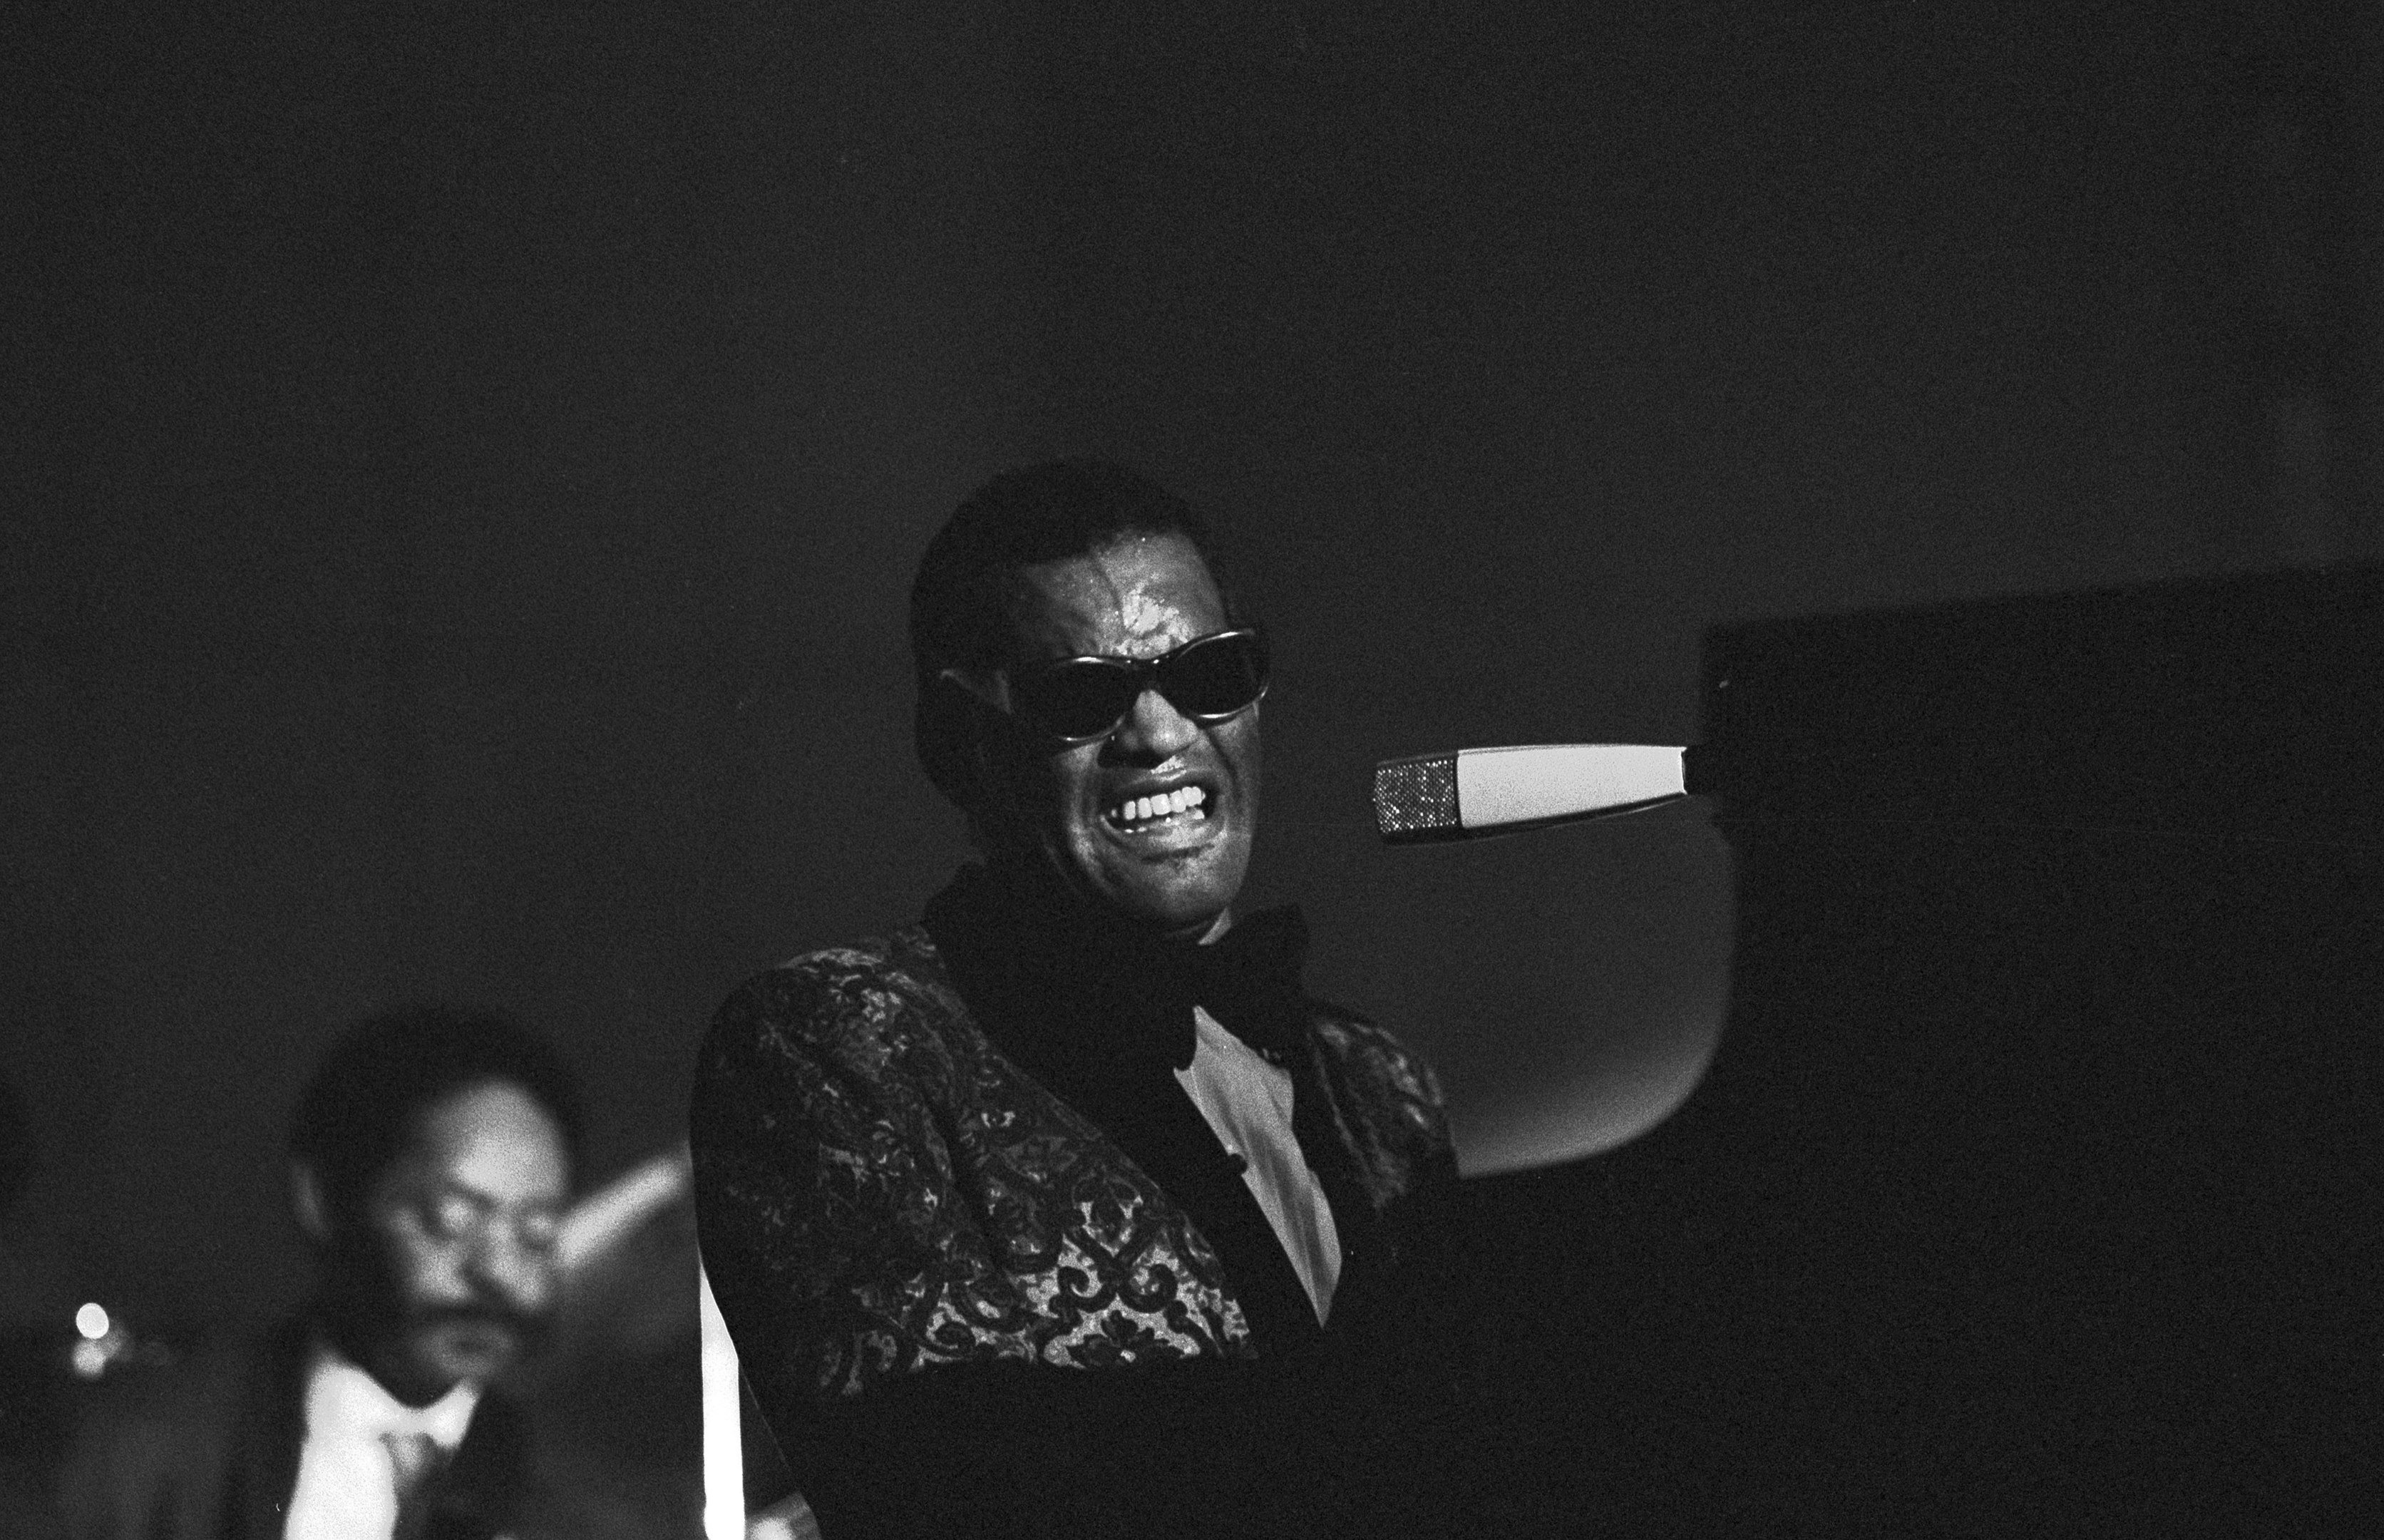 Ray Charles in der Hamburger Musikhalle, September 1971 | Photo By Heinrich Klaffs - Ray Carles, CC BY-SA 2.0, Wikimedia Commons Images